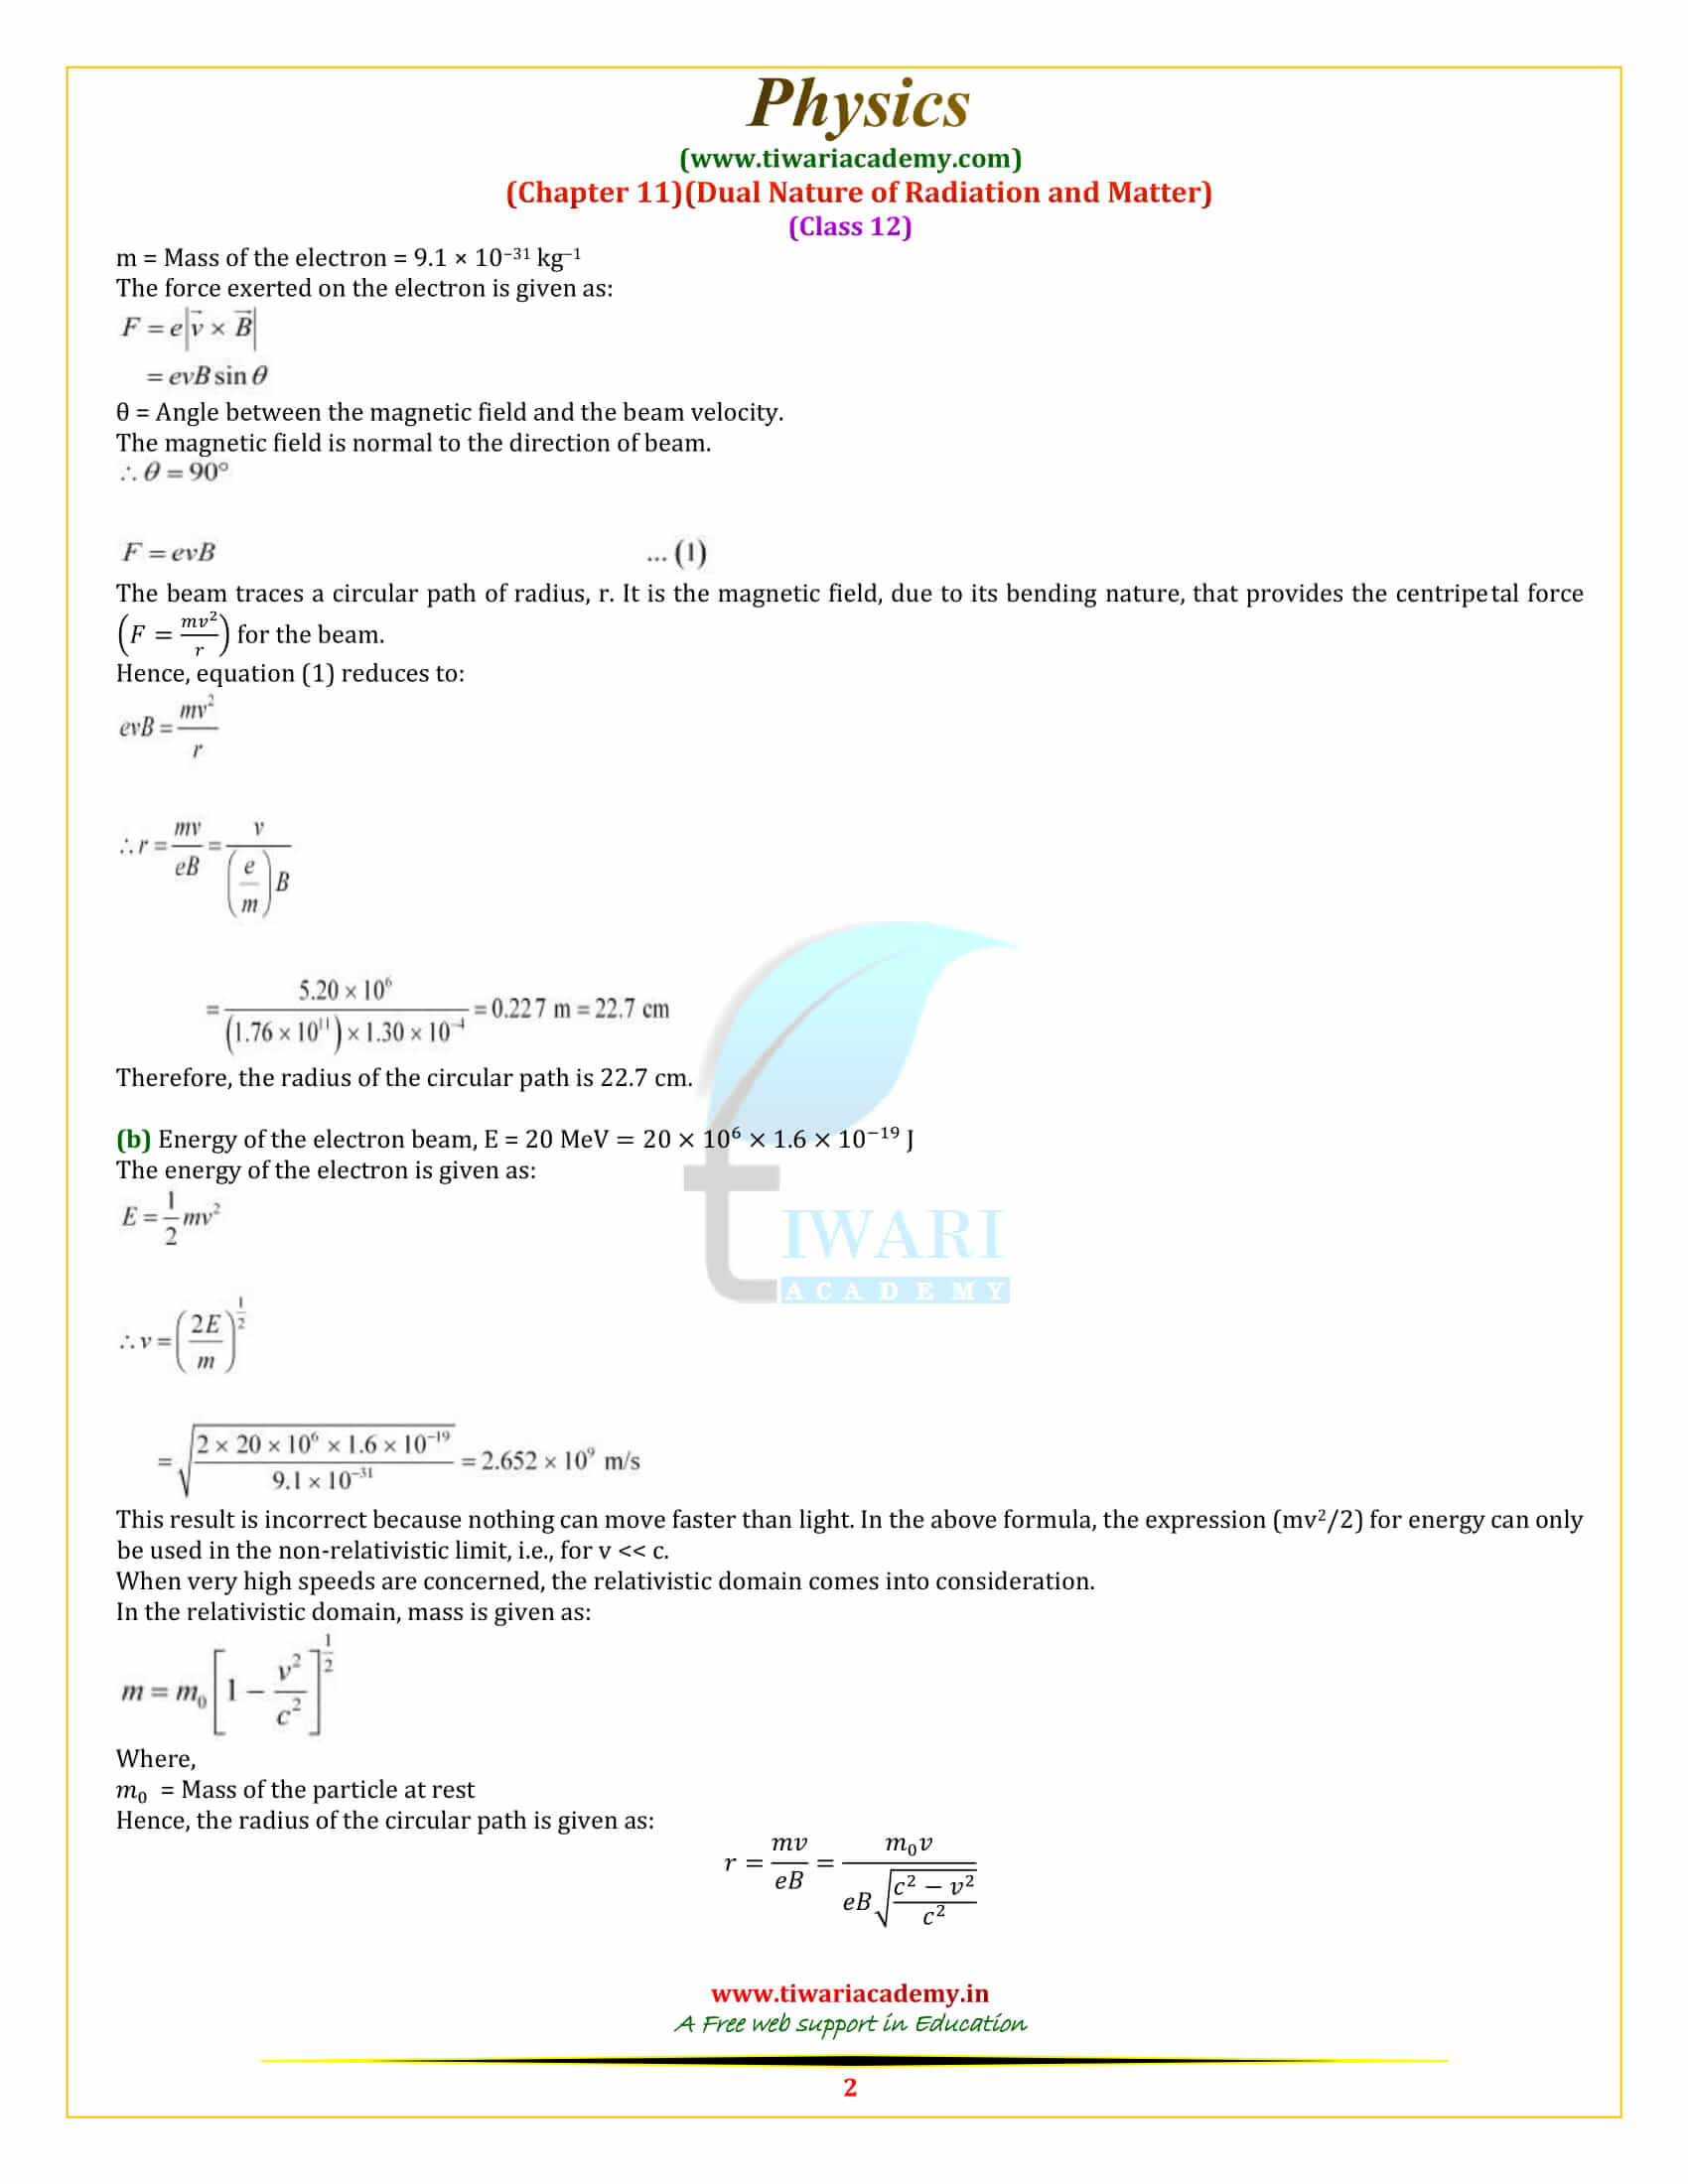 12 Physics Chapter 11 Dual Nature of Radiation and Matter additional exercises answers in pdf form